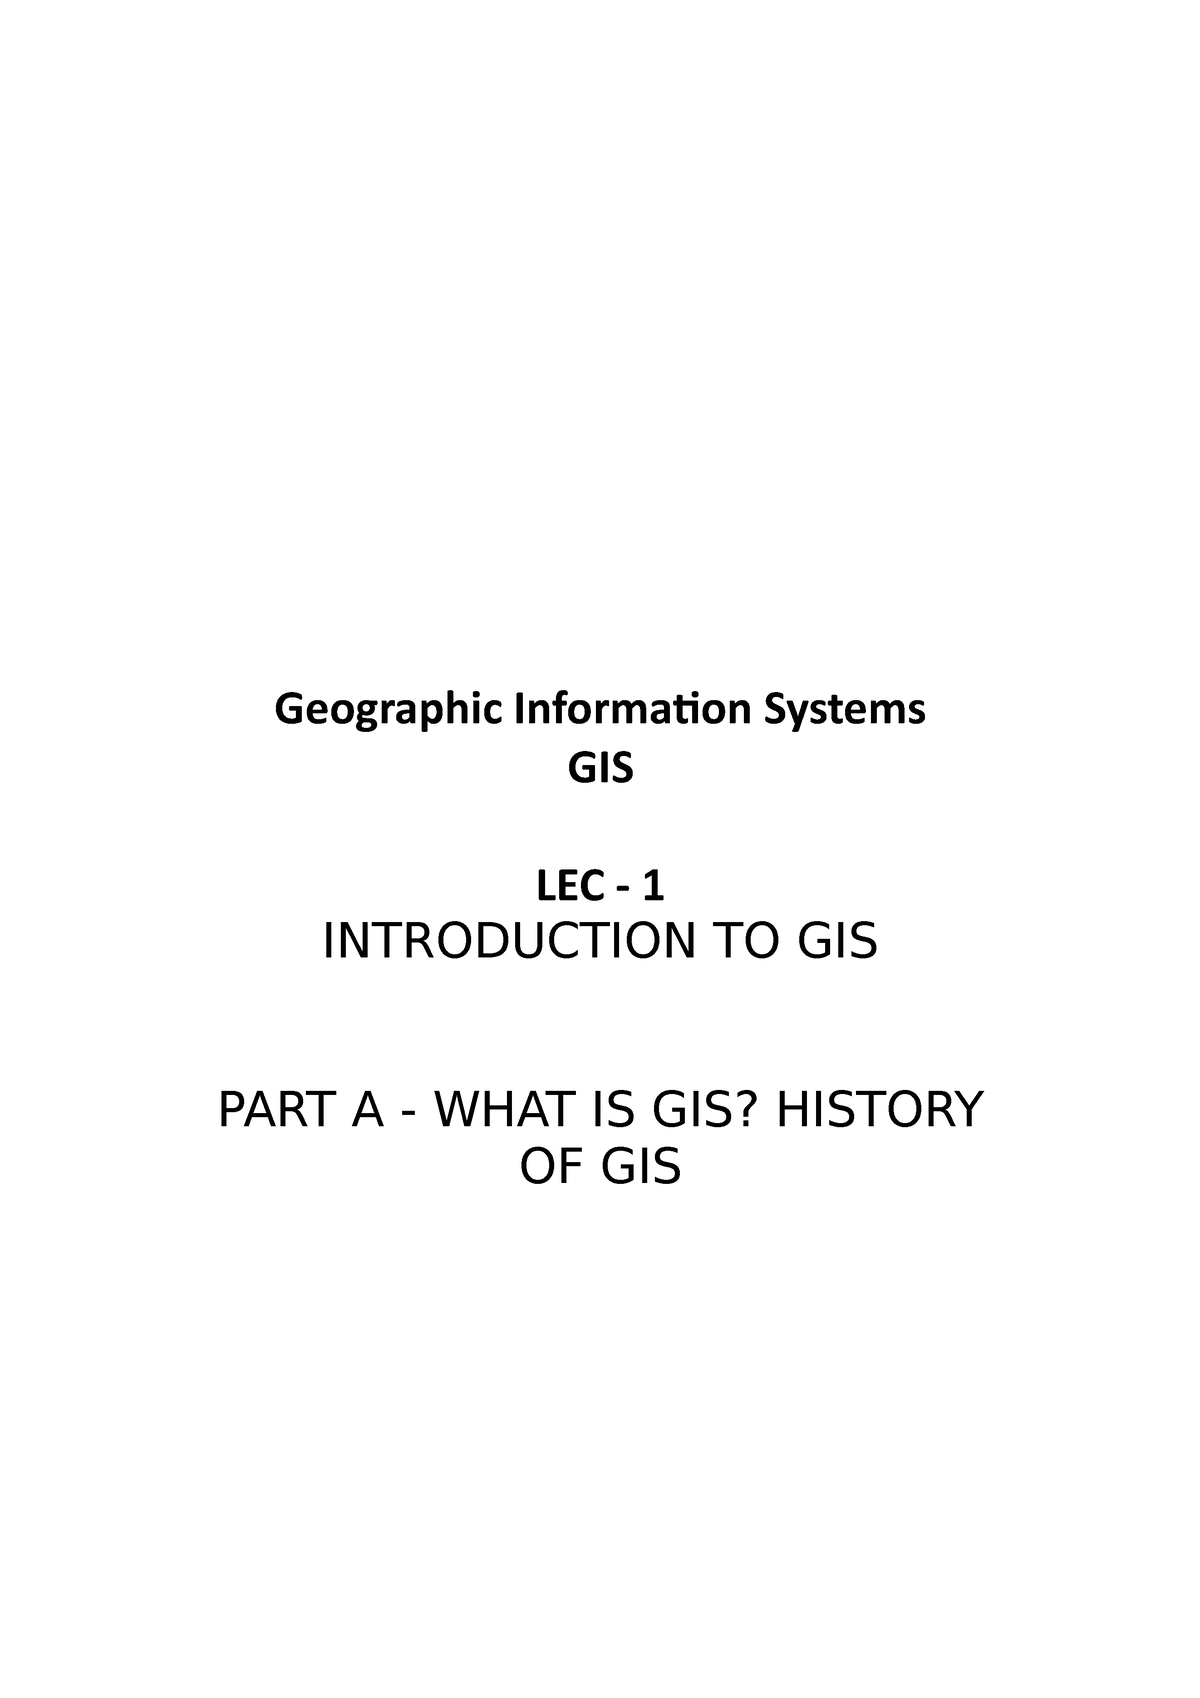 gis-geographic-information-systems-lec-1-part-a-geographic-information-systems-gis-lec-1